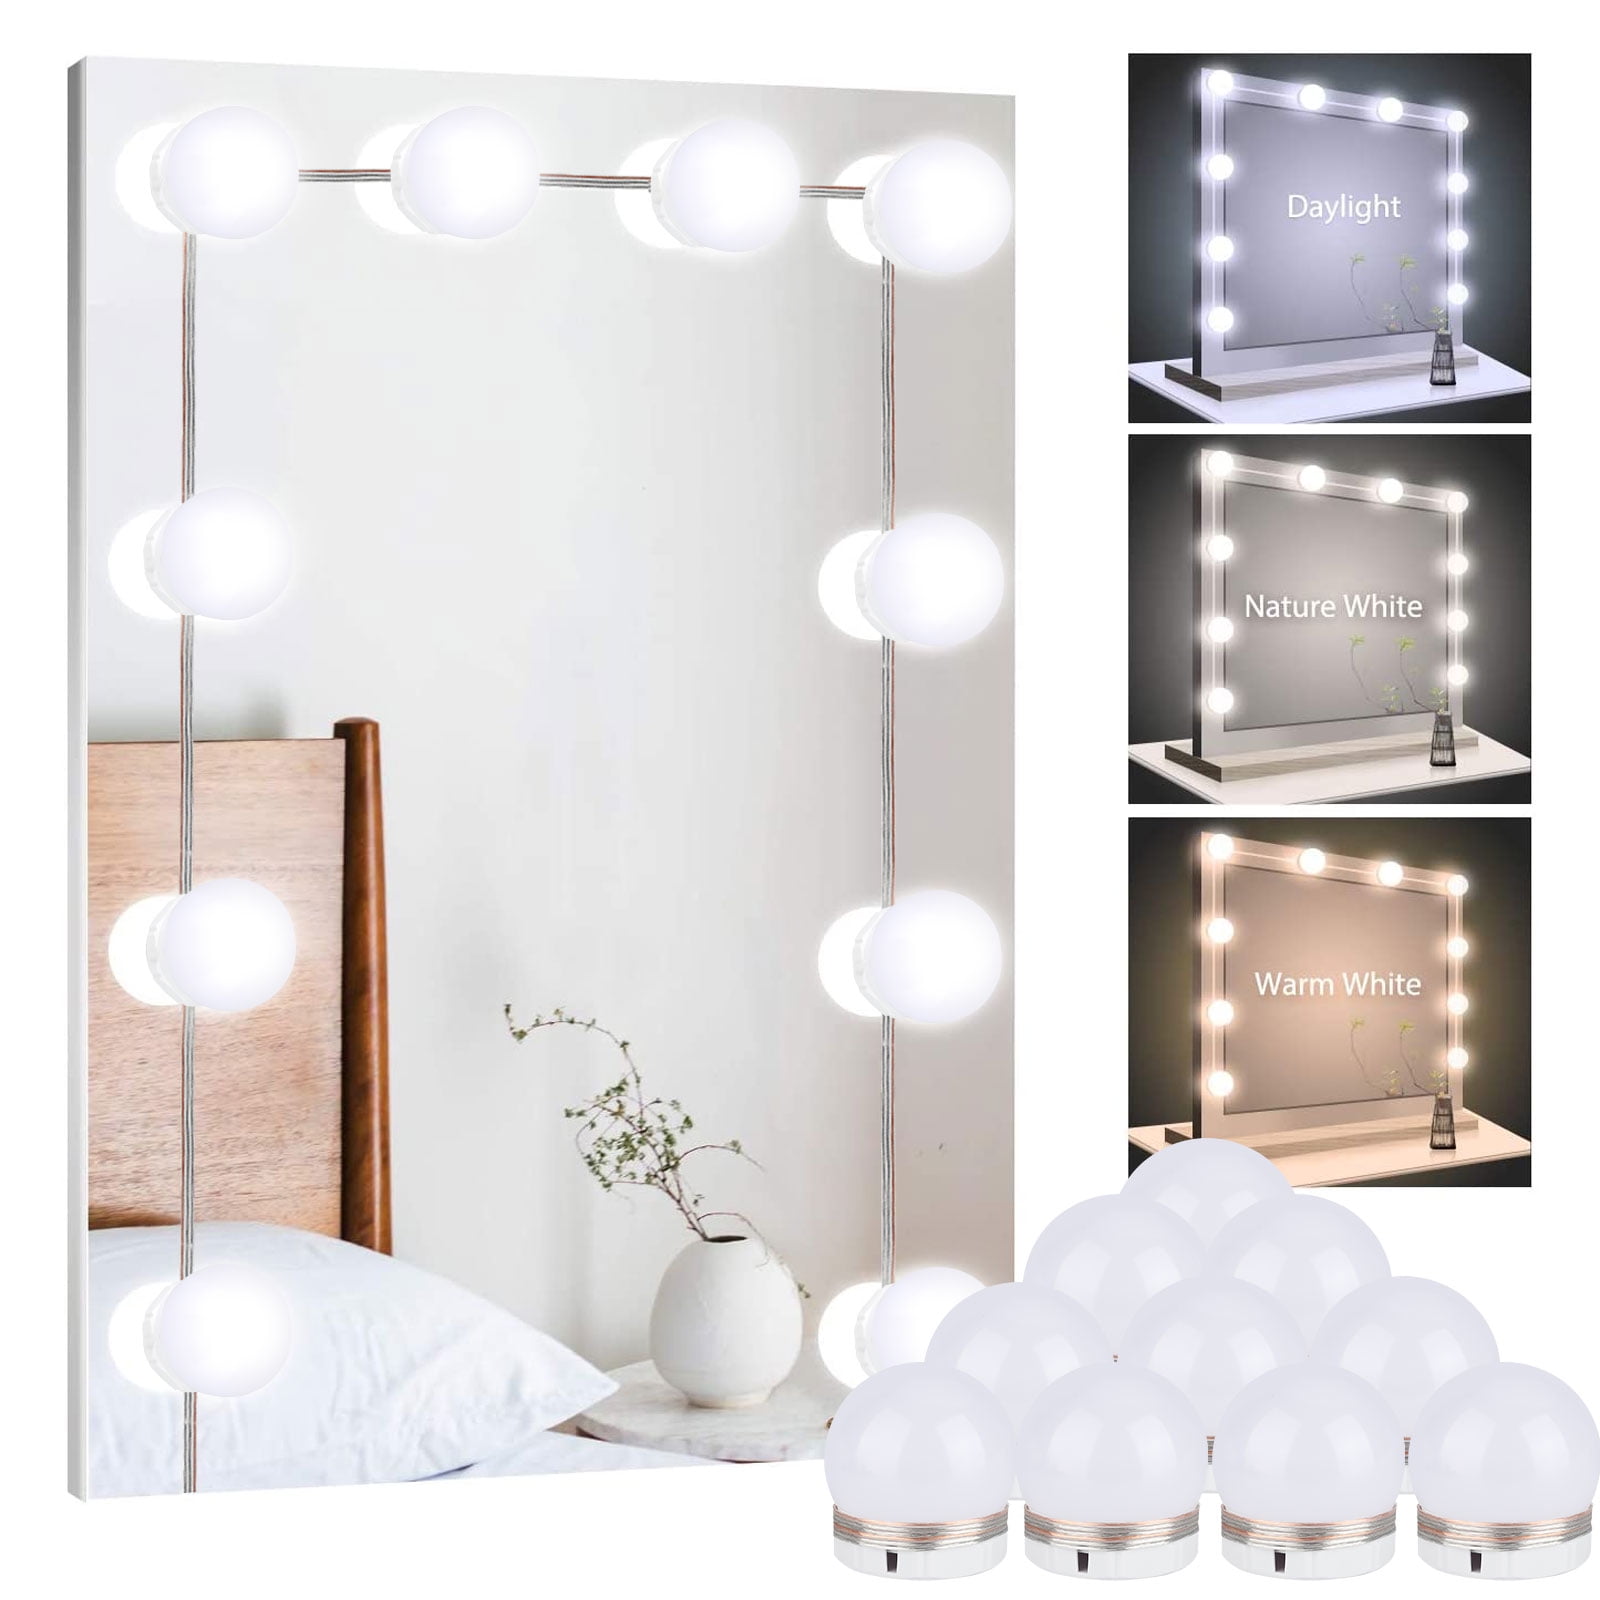 Hollywood MAKEUP MIRROR LED LIGHT for VANITY WIRELESS REMOTE DIMMER & UL POWER 